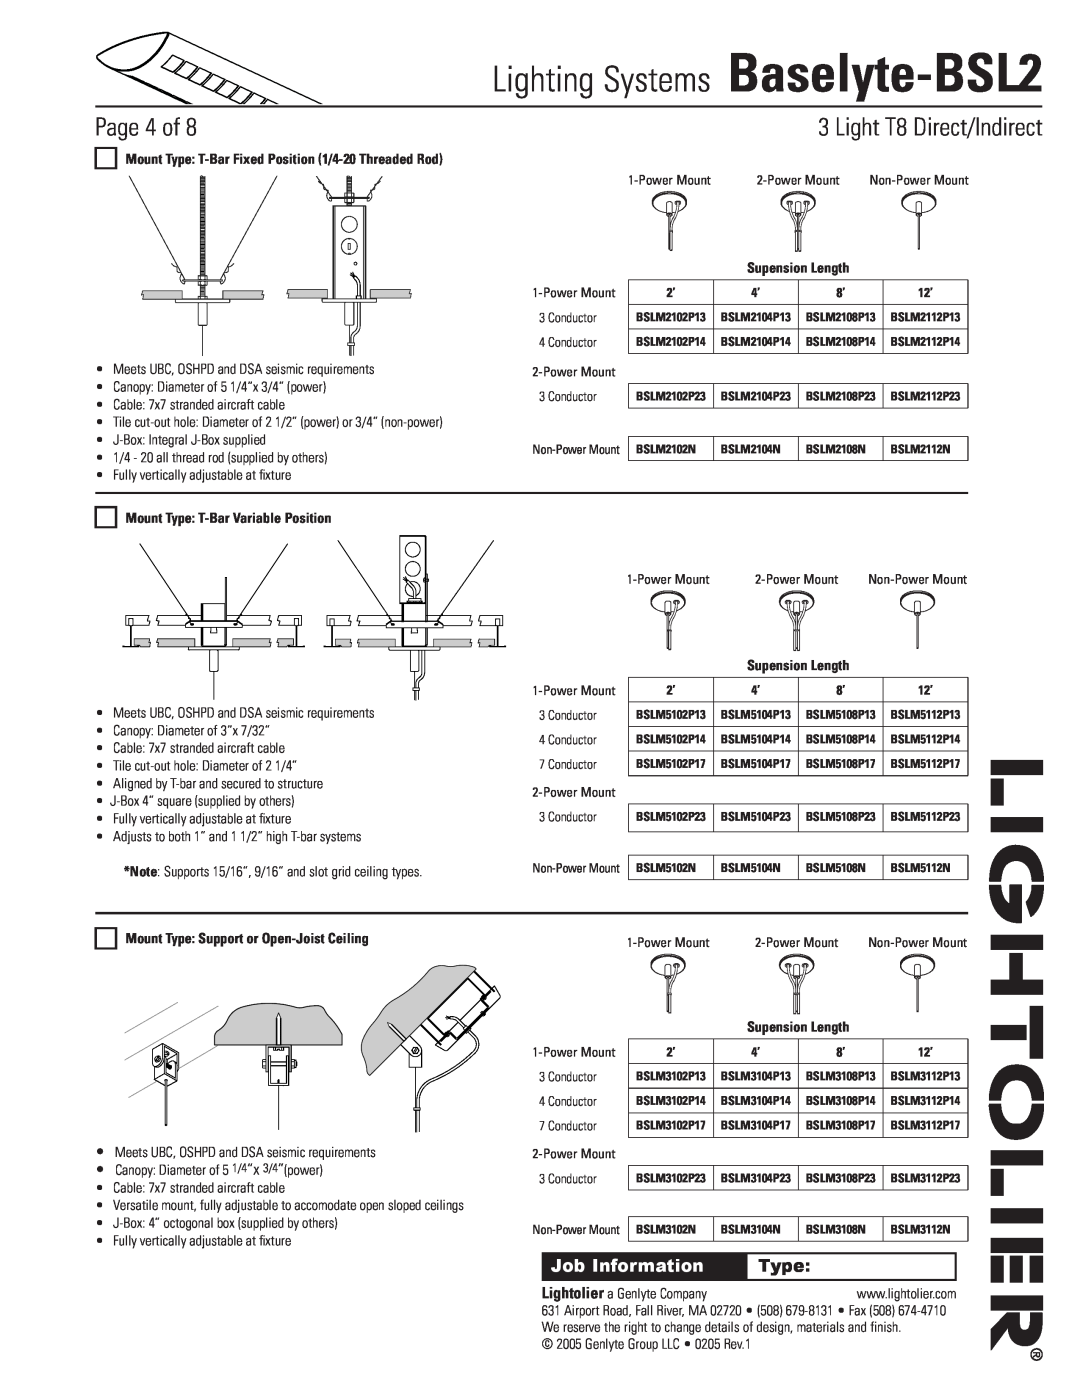 Lightolier Lighting Systems Baselyte-BSL2, Mount Type T-BarVariable Position, Mount Type Support or Open-JoistCeiling 